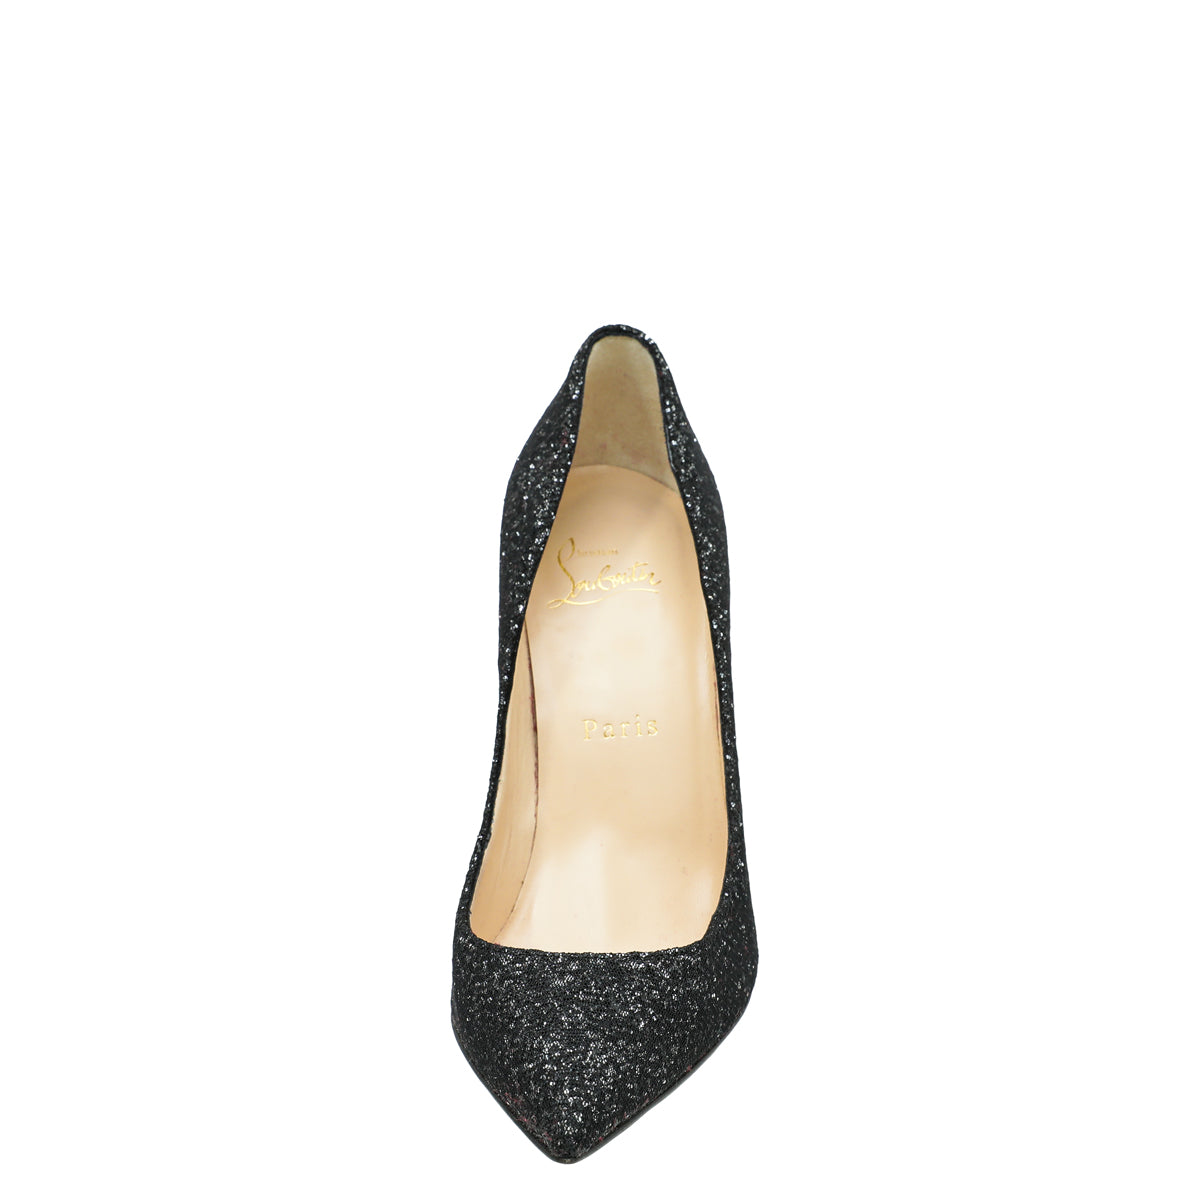 Christian Louboutin Bicolor Mesh Glittered Pigalle Pumps 37